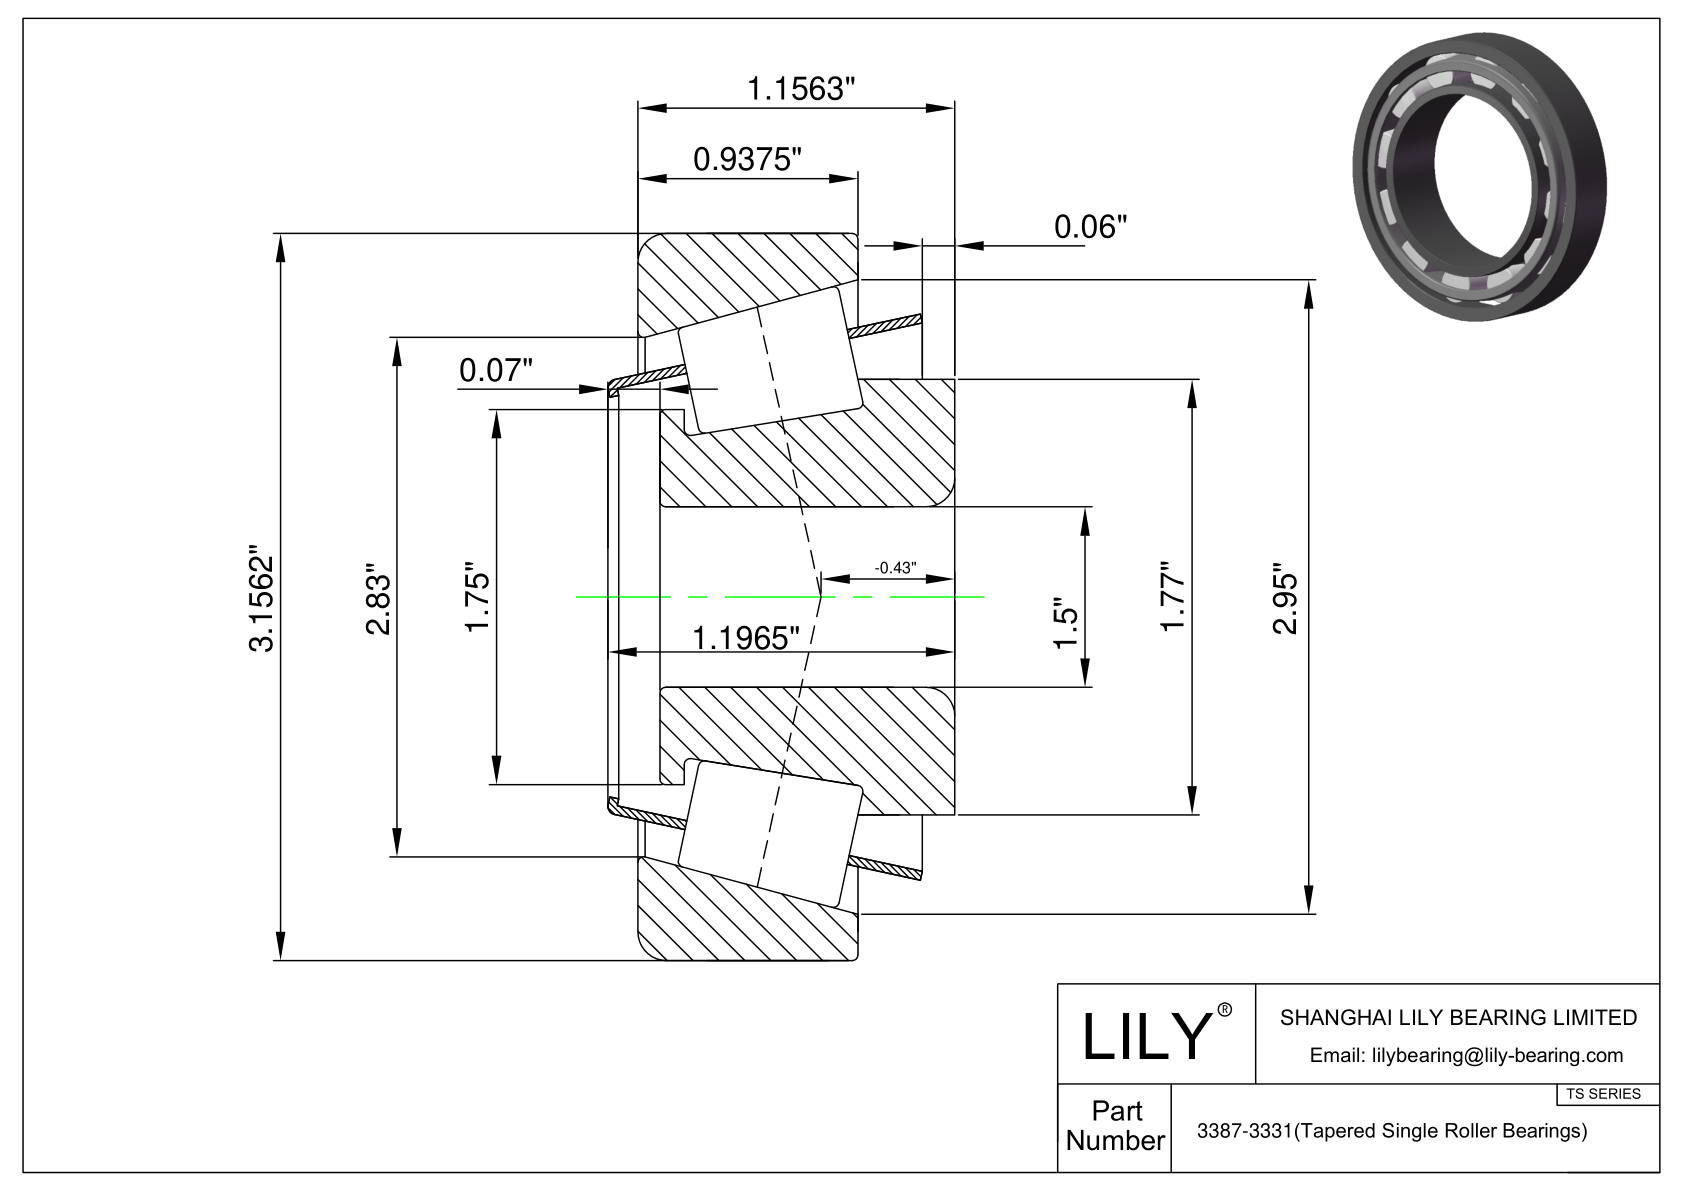 3387-3331 TS (Tapered Single Roller Bearings) (Imperial) cad drawing